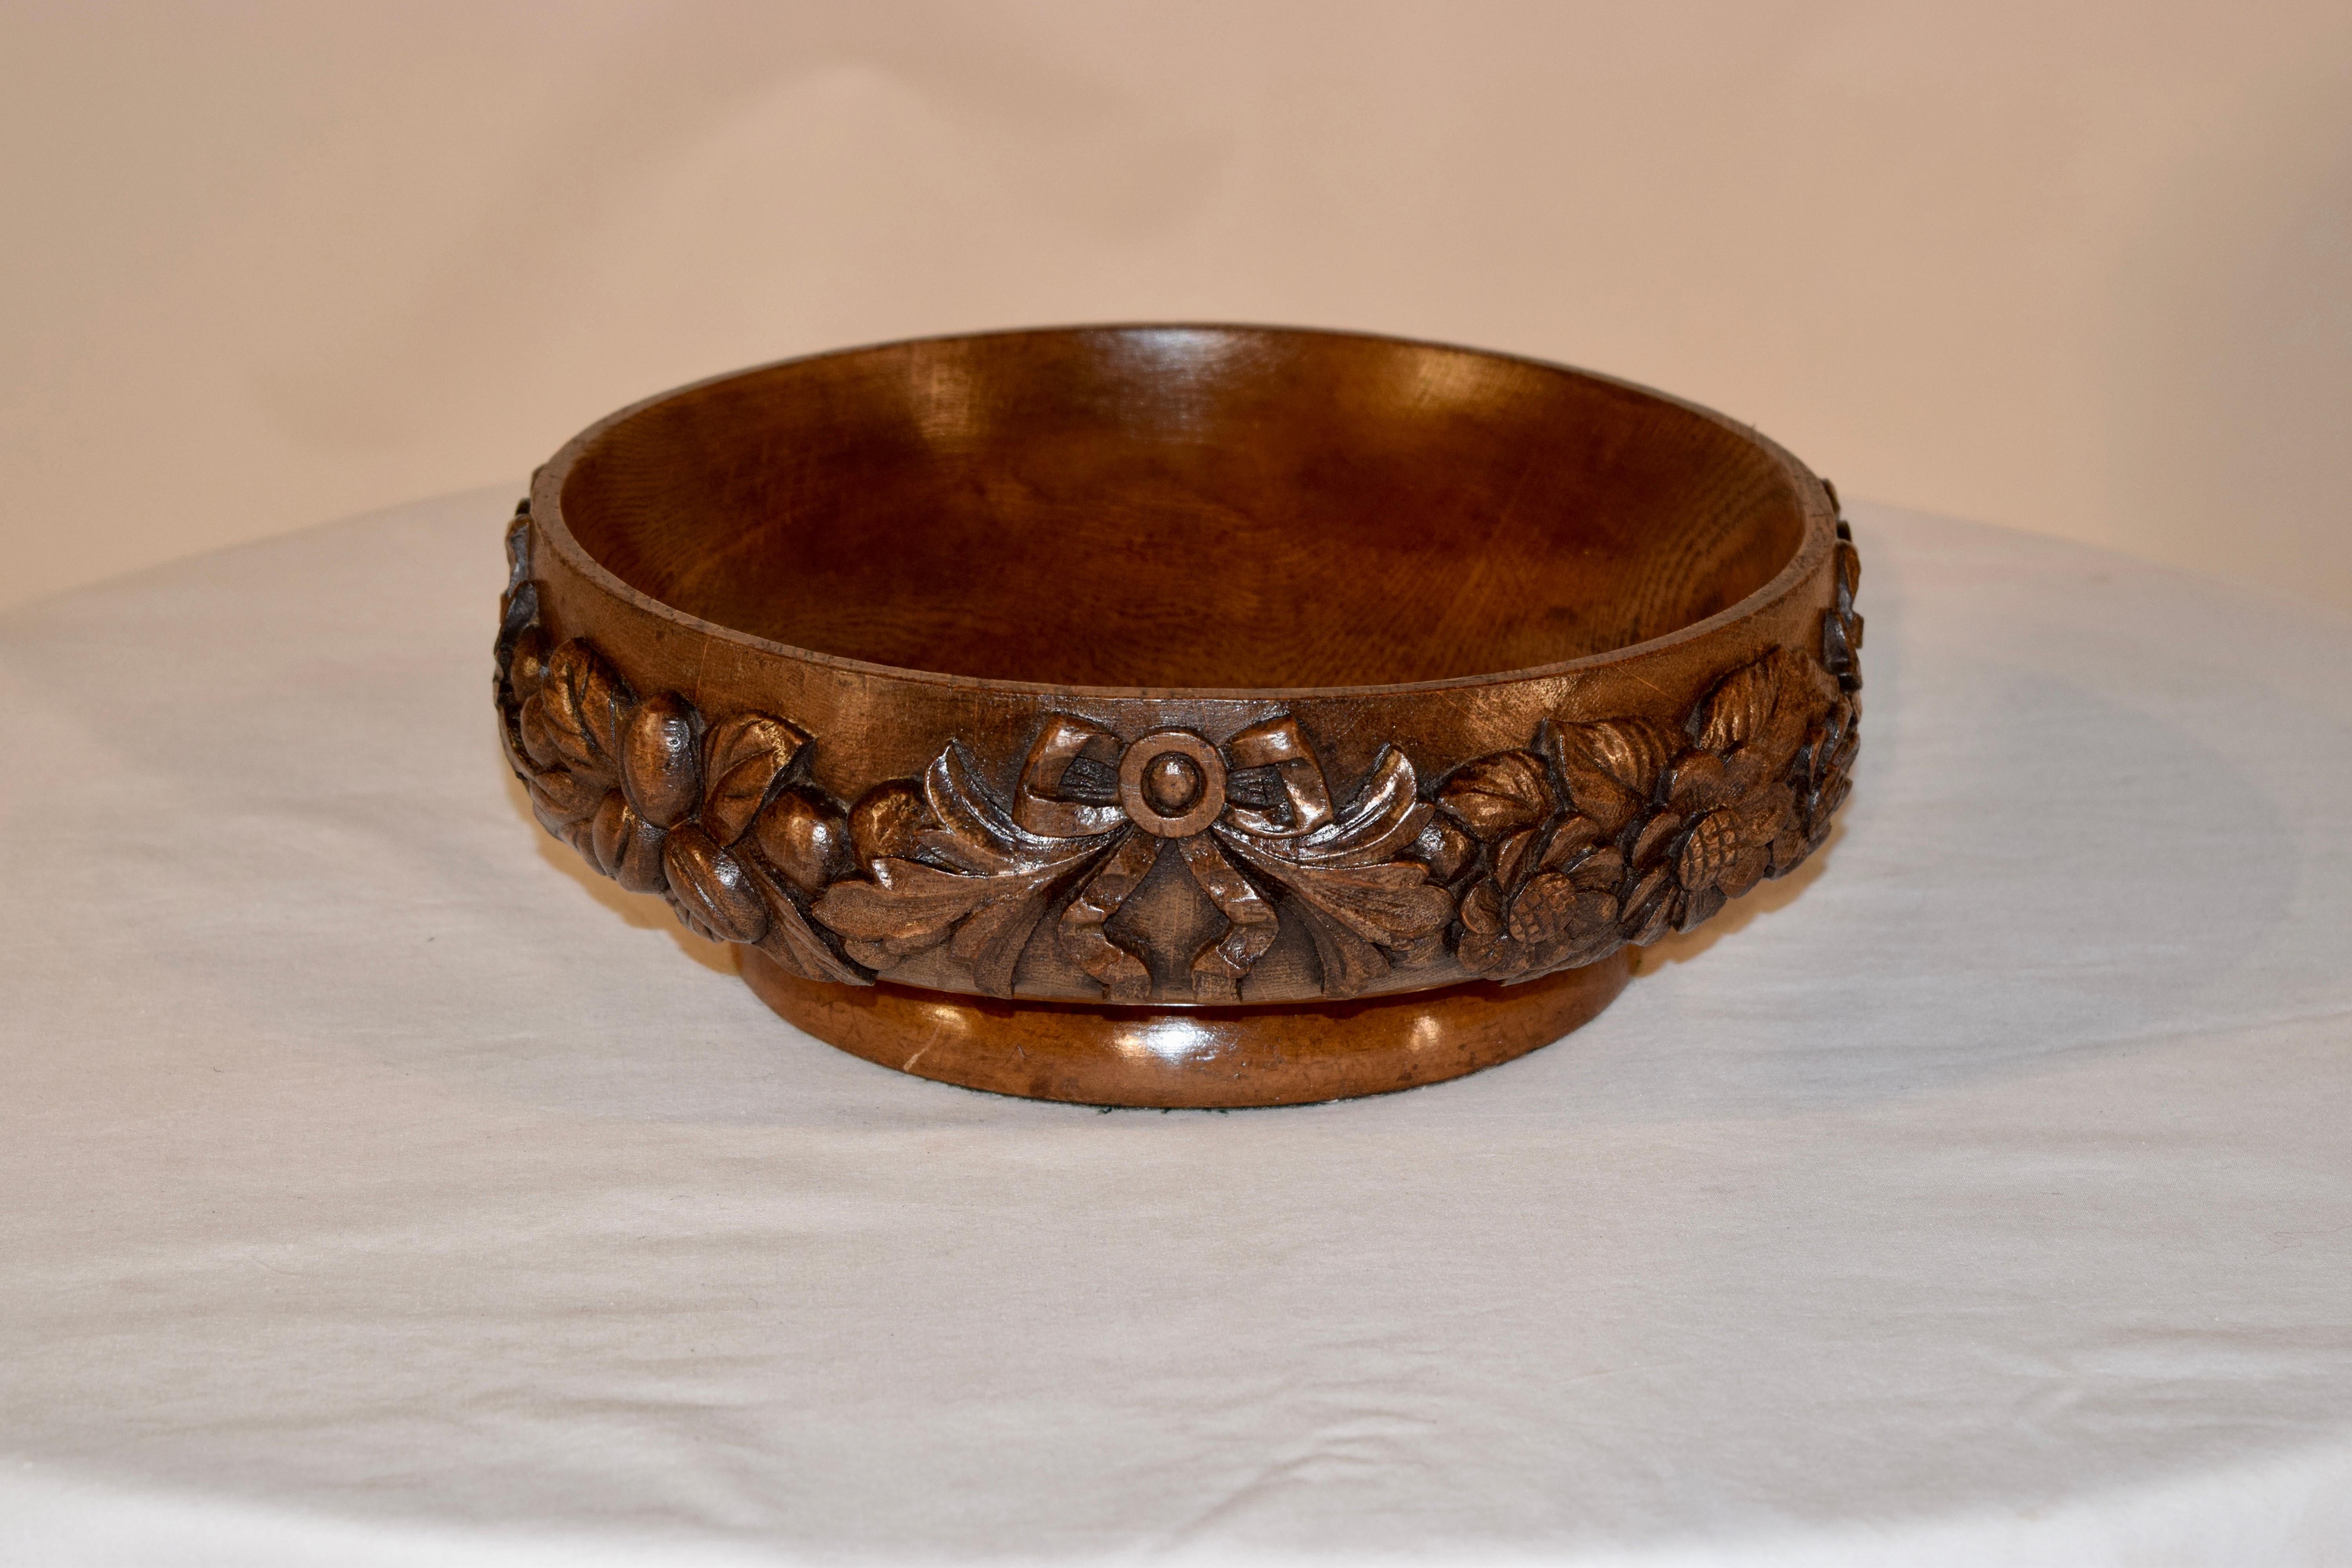 19th century oak fruit bowl from England with lovely hand carved decoration of bows and florals all the way around the outside, supported on a turned base.